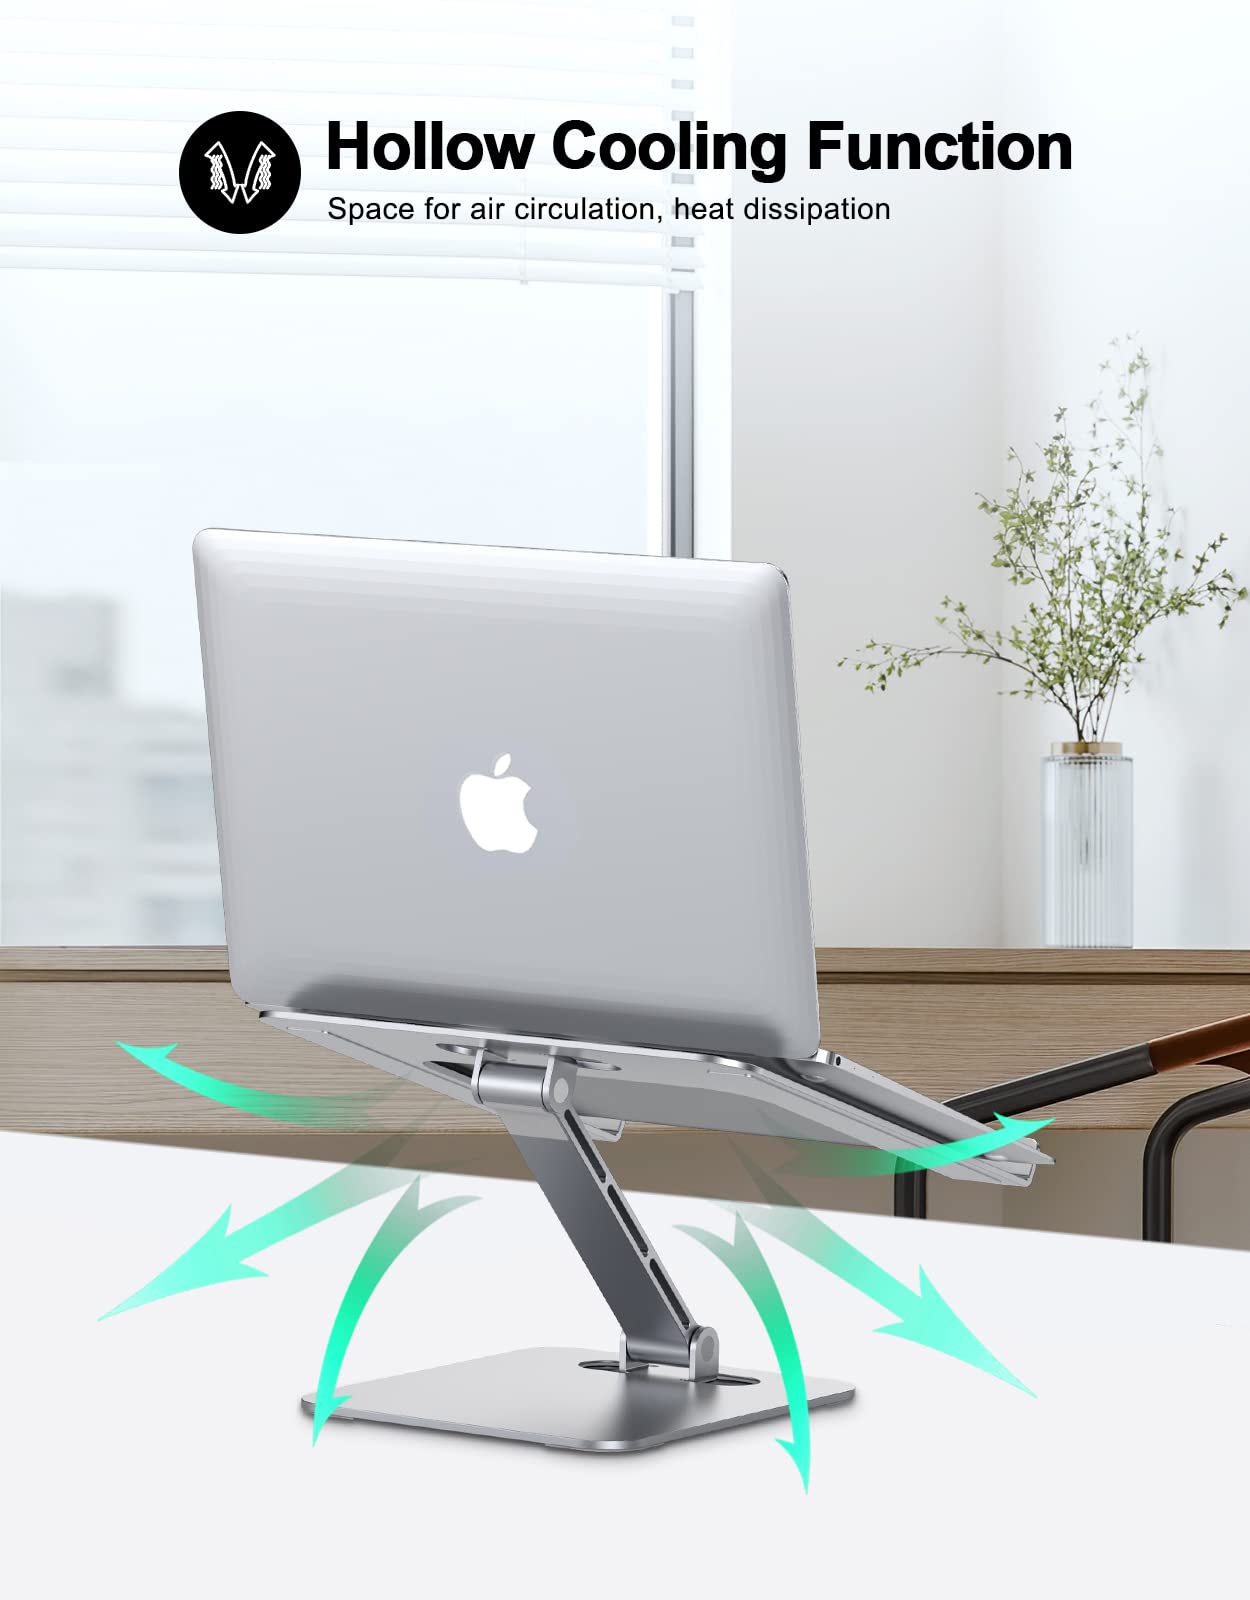 Glangeh Laptop Stand, Adjustable Ergonomic Portable Aluminum Laptop Riser, Foldable Computer Stand Compatible with MacBook Air Pro, Samsung, Sony, Dell, ASUS, Lenovo, HP, More 10-16" Laptops